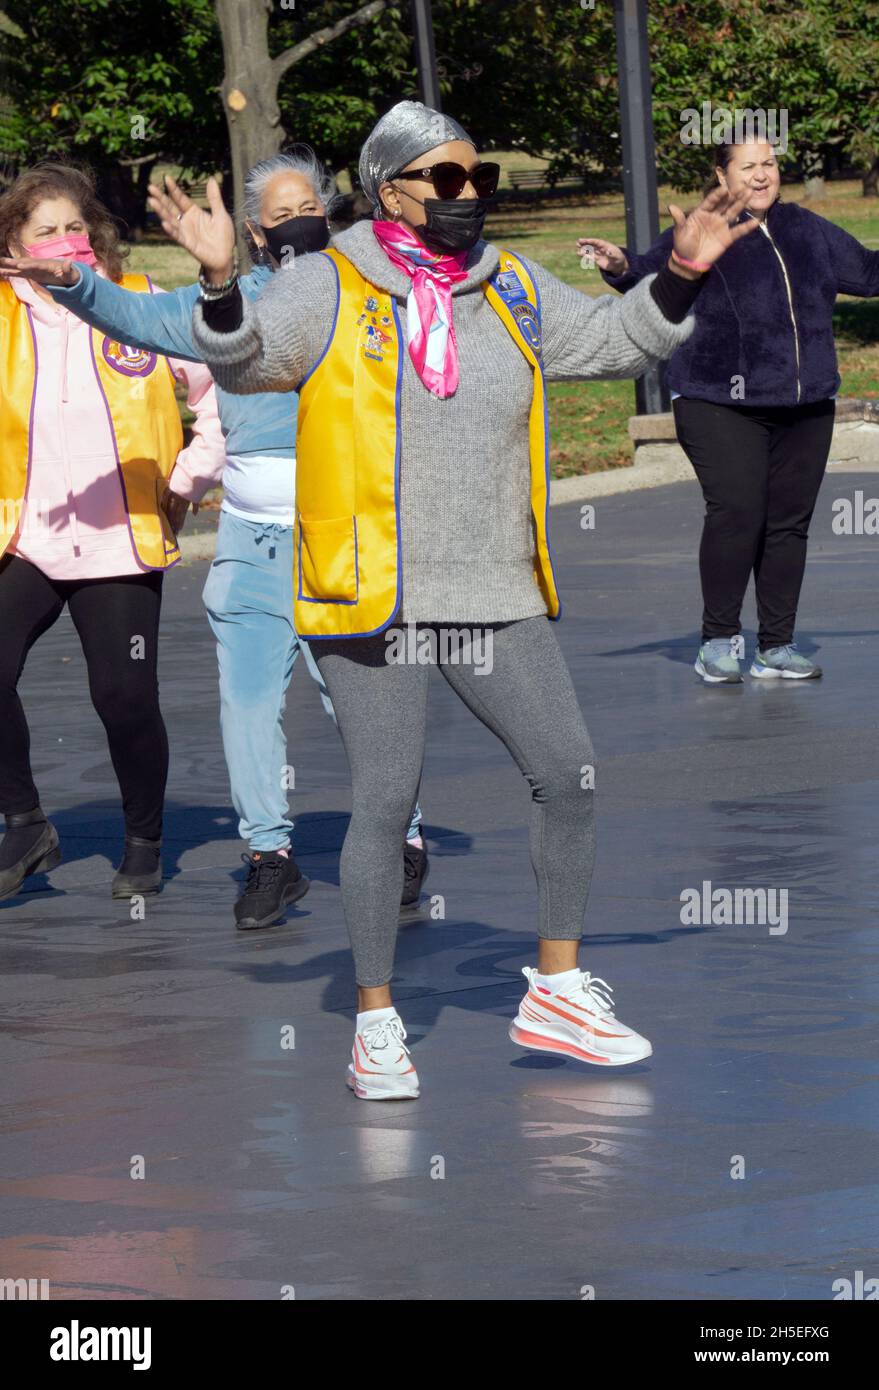 A group of middle aged women from the Lions club do dance exercises in Flushing Meadows Corona Park in Queens, New York. Stock Photo